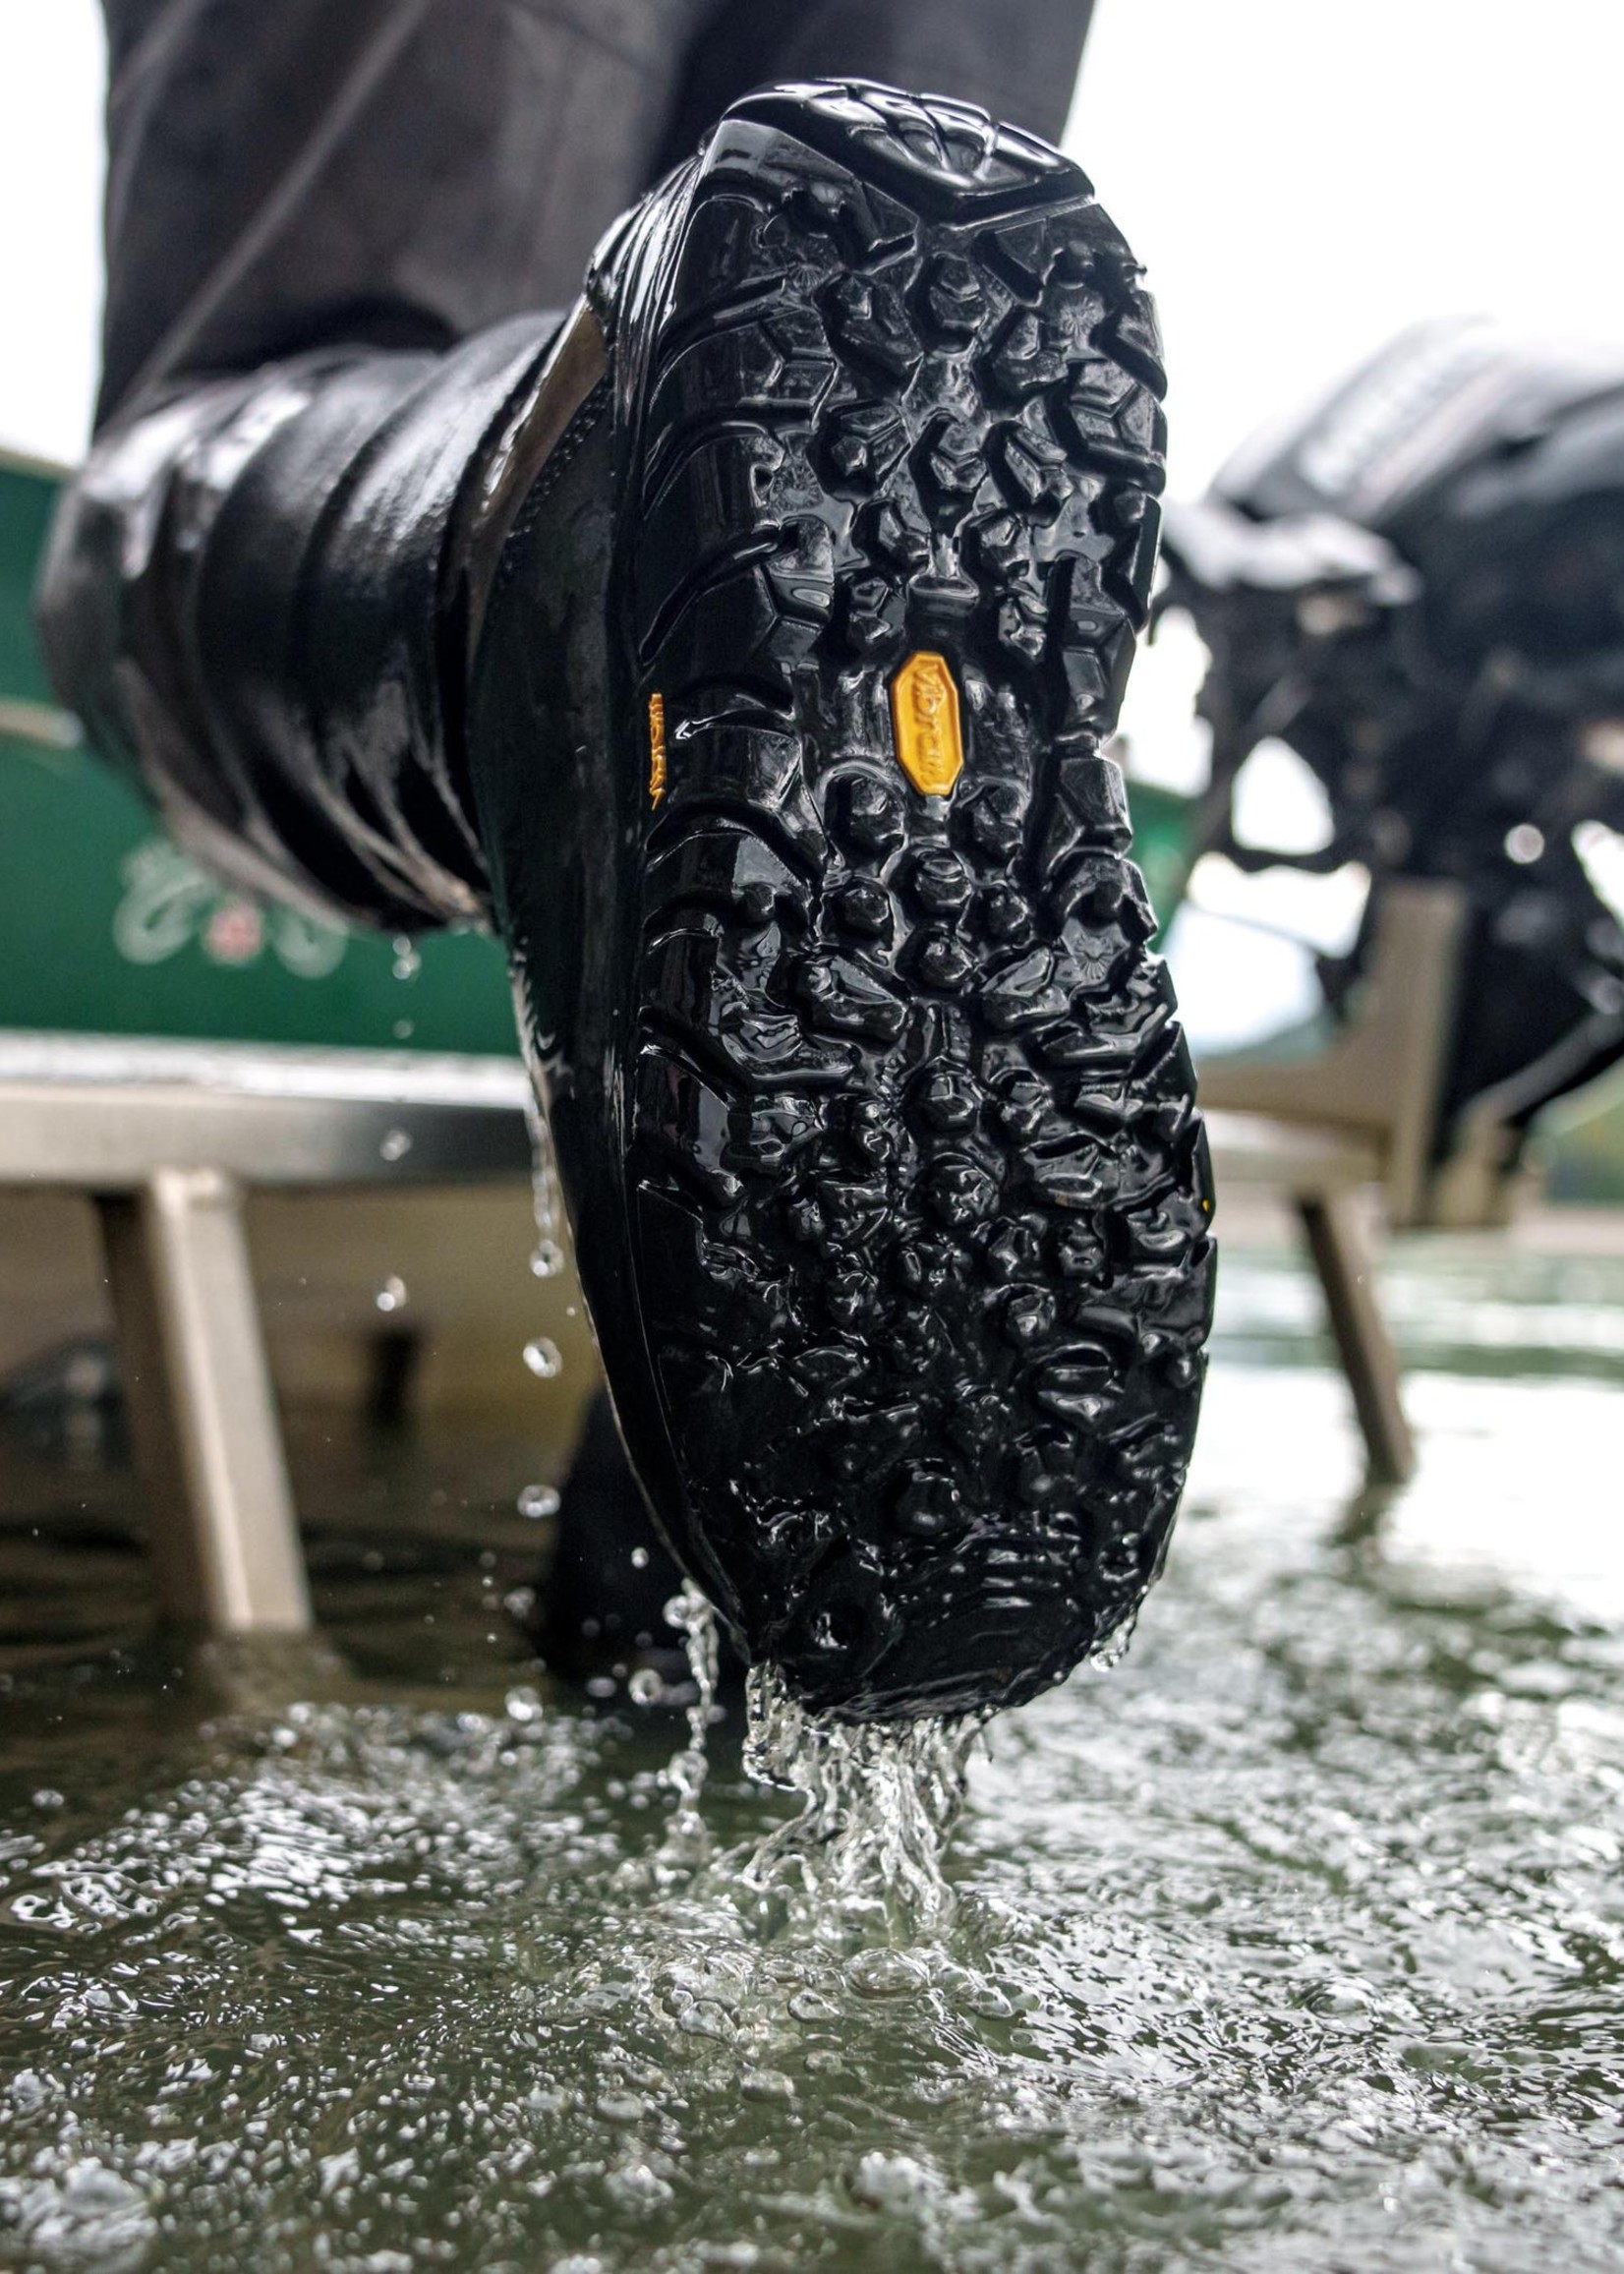 SIMMS M's G3 Guide Wading Boots - Vibram Soles